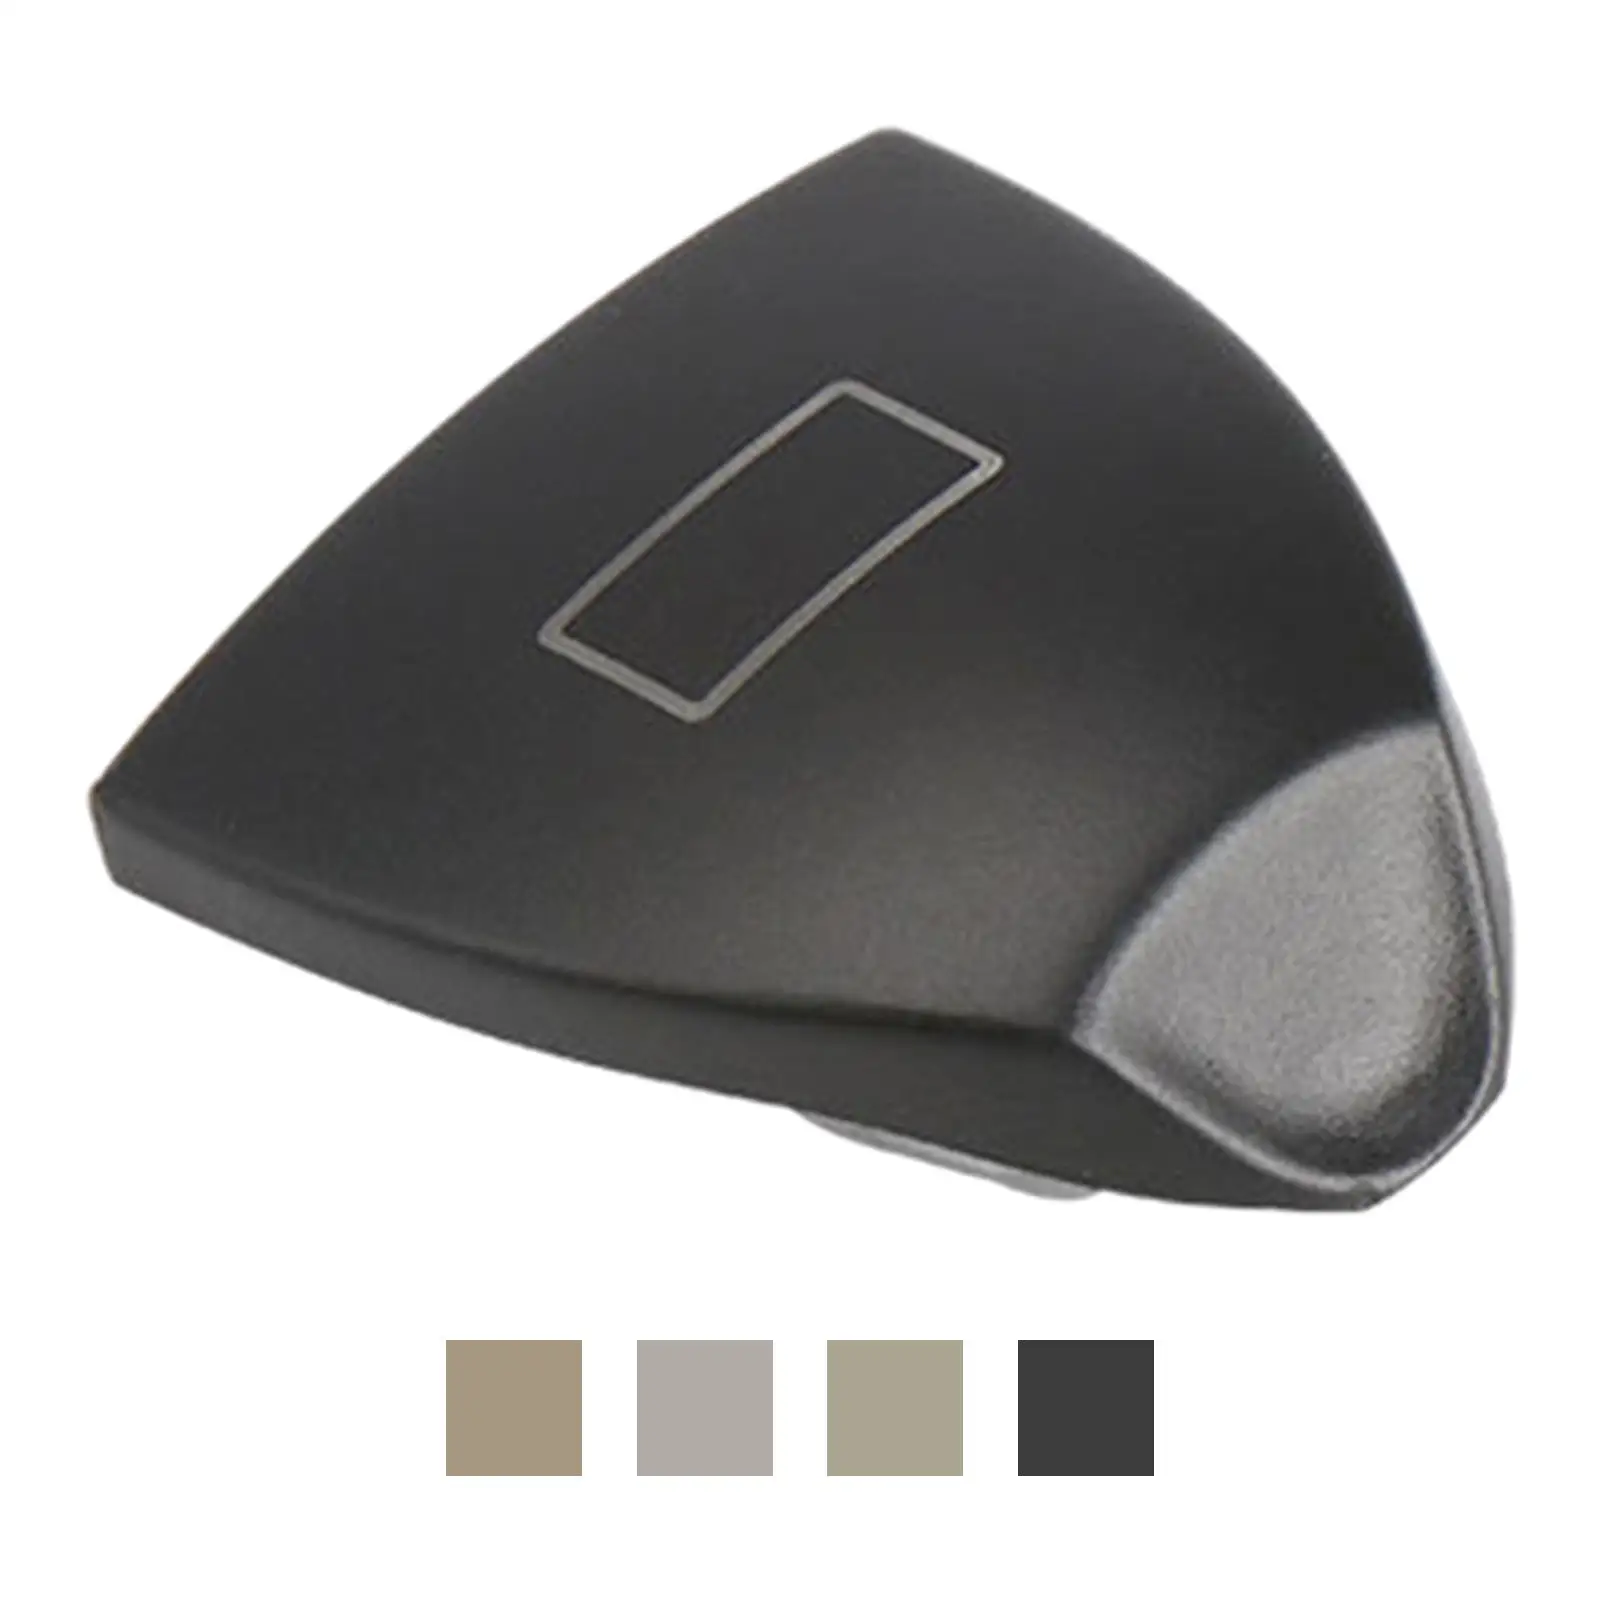 W211 Sunroof Window Switch Button Switch Button Cover Automotive Roof Control Panel Switch Car Fits for Benz E-Class 03-08